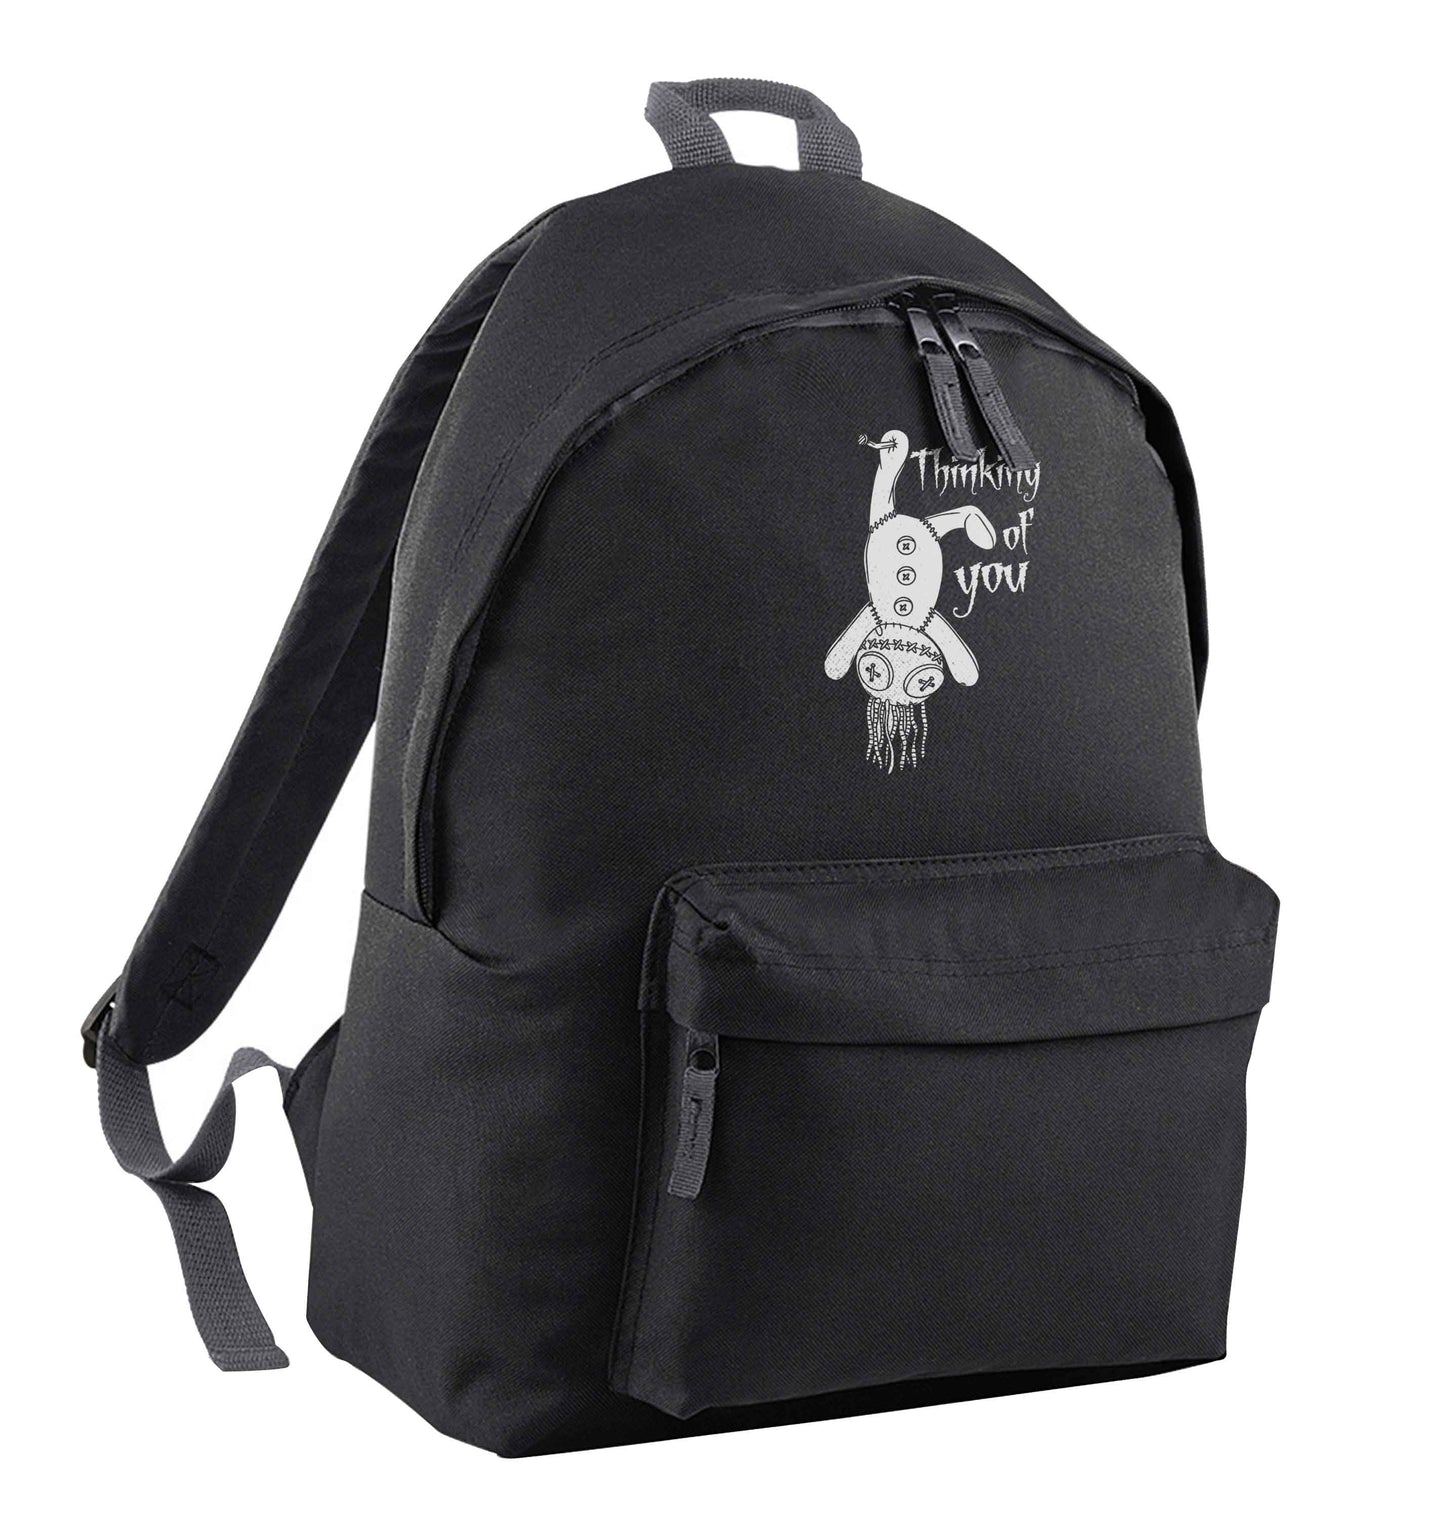 Thinking of you black adults backpack